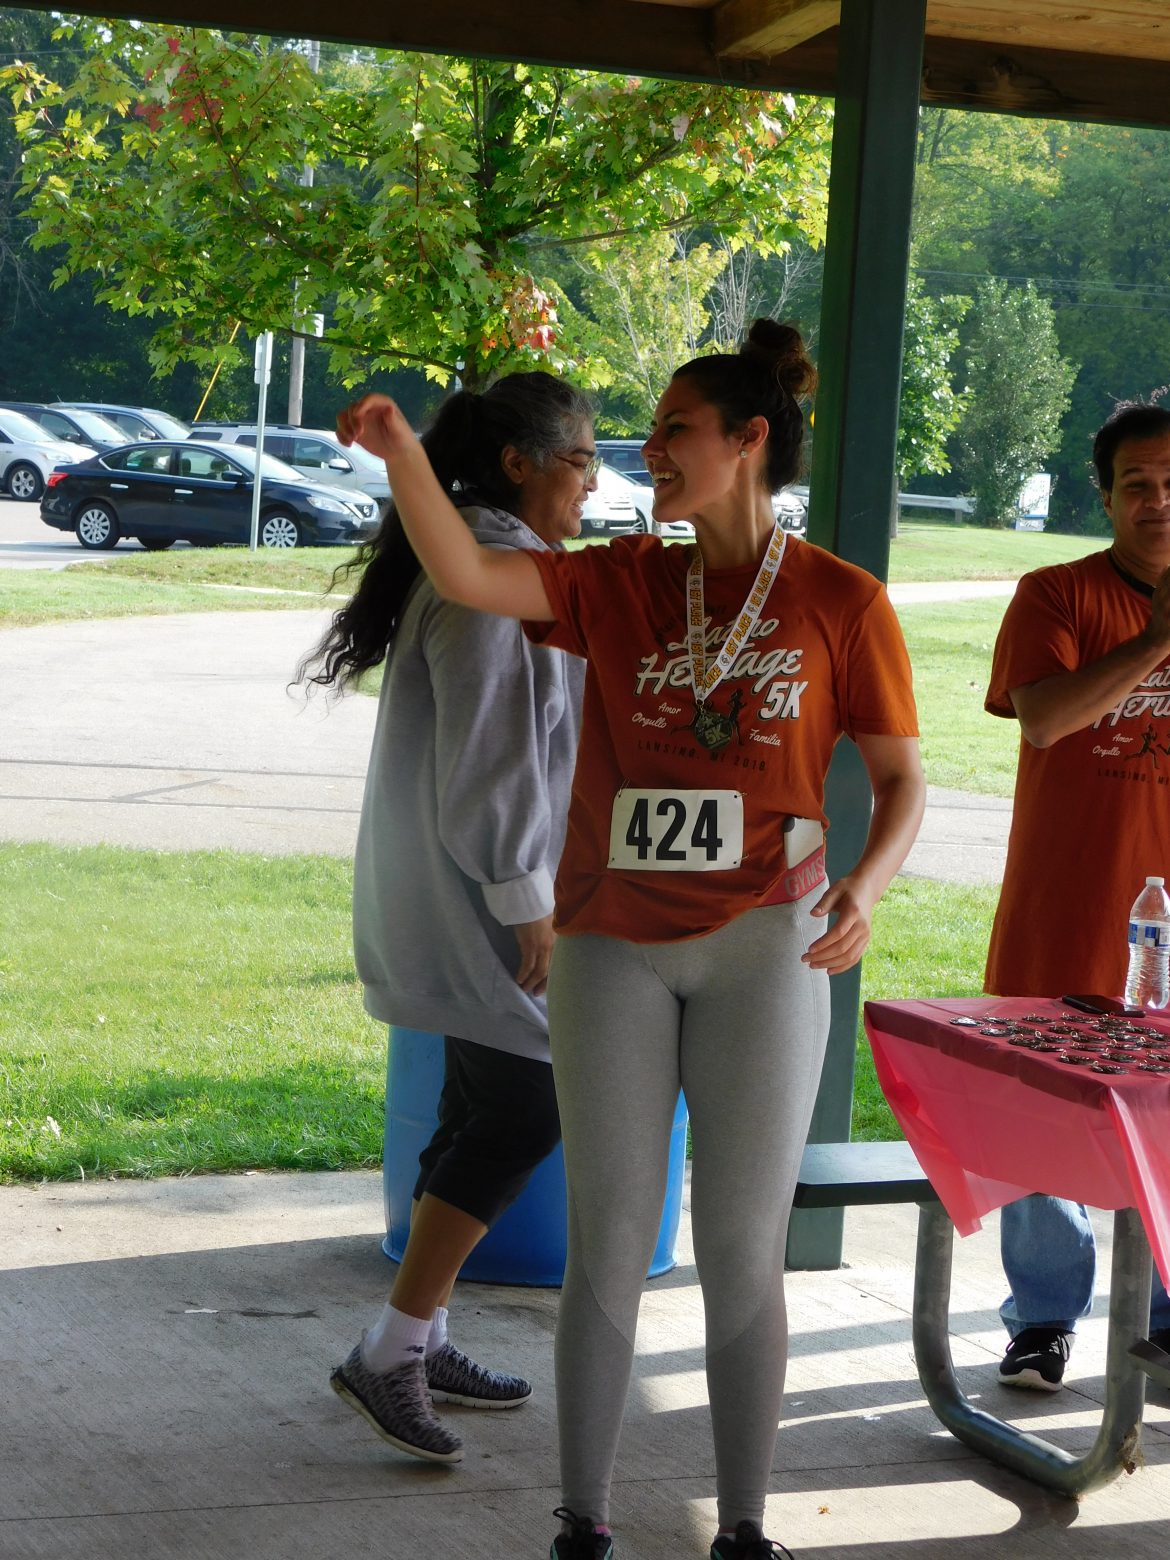 Great Turnout, Pan Dulce And Taqueria Tomatitos Food Truck Make Cafecito Caliente 5K Run/Walk A Success!